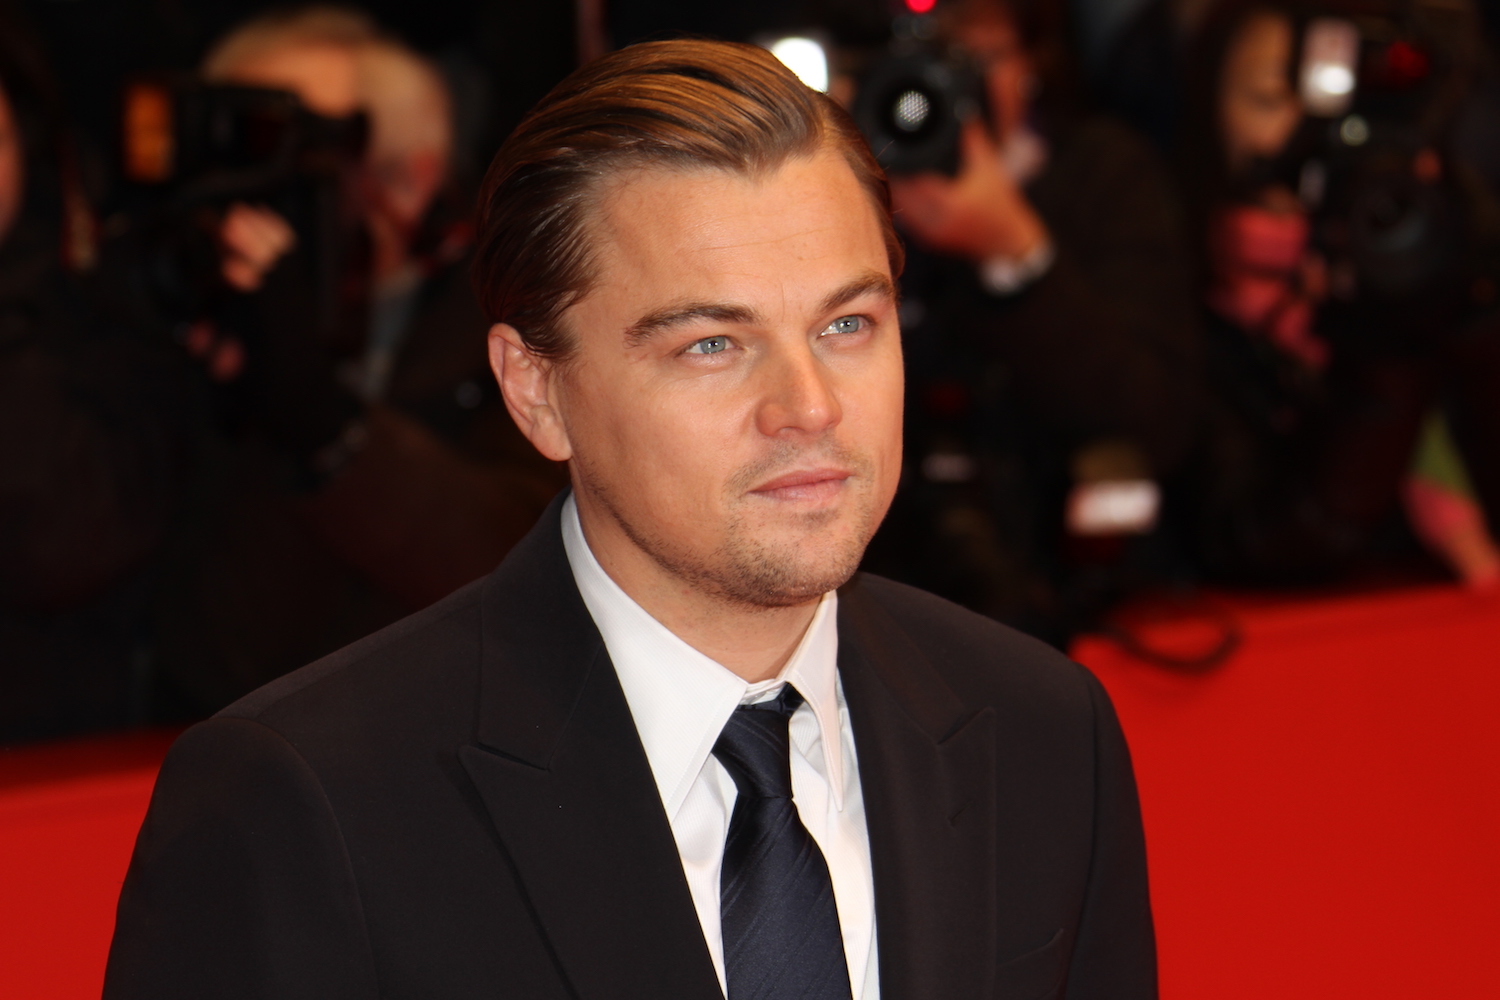 Leo Dicaprios Rumored Plan To Buy A Dinosaur Duo Has Paleontologists Upset Live Science 